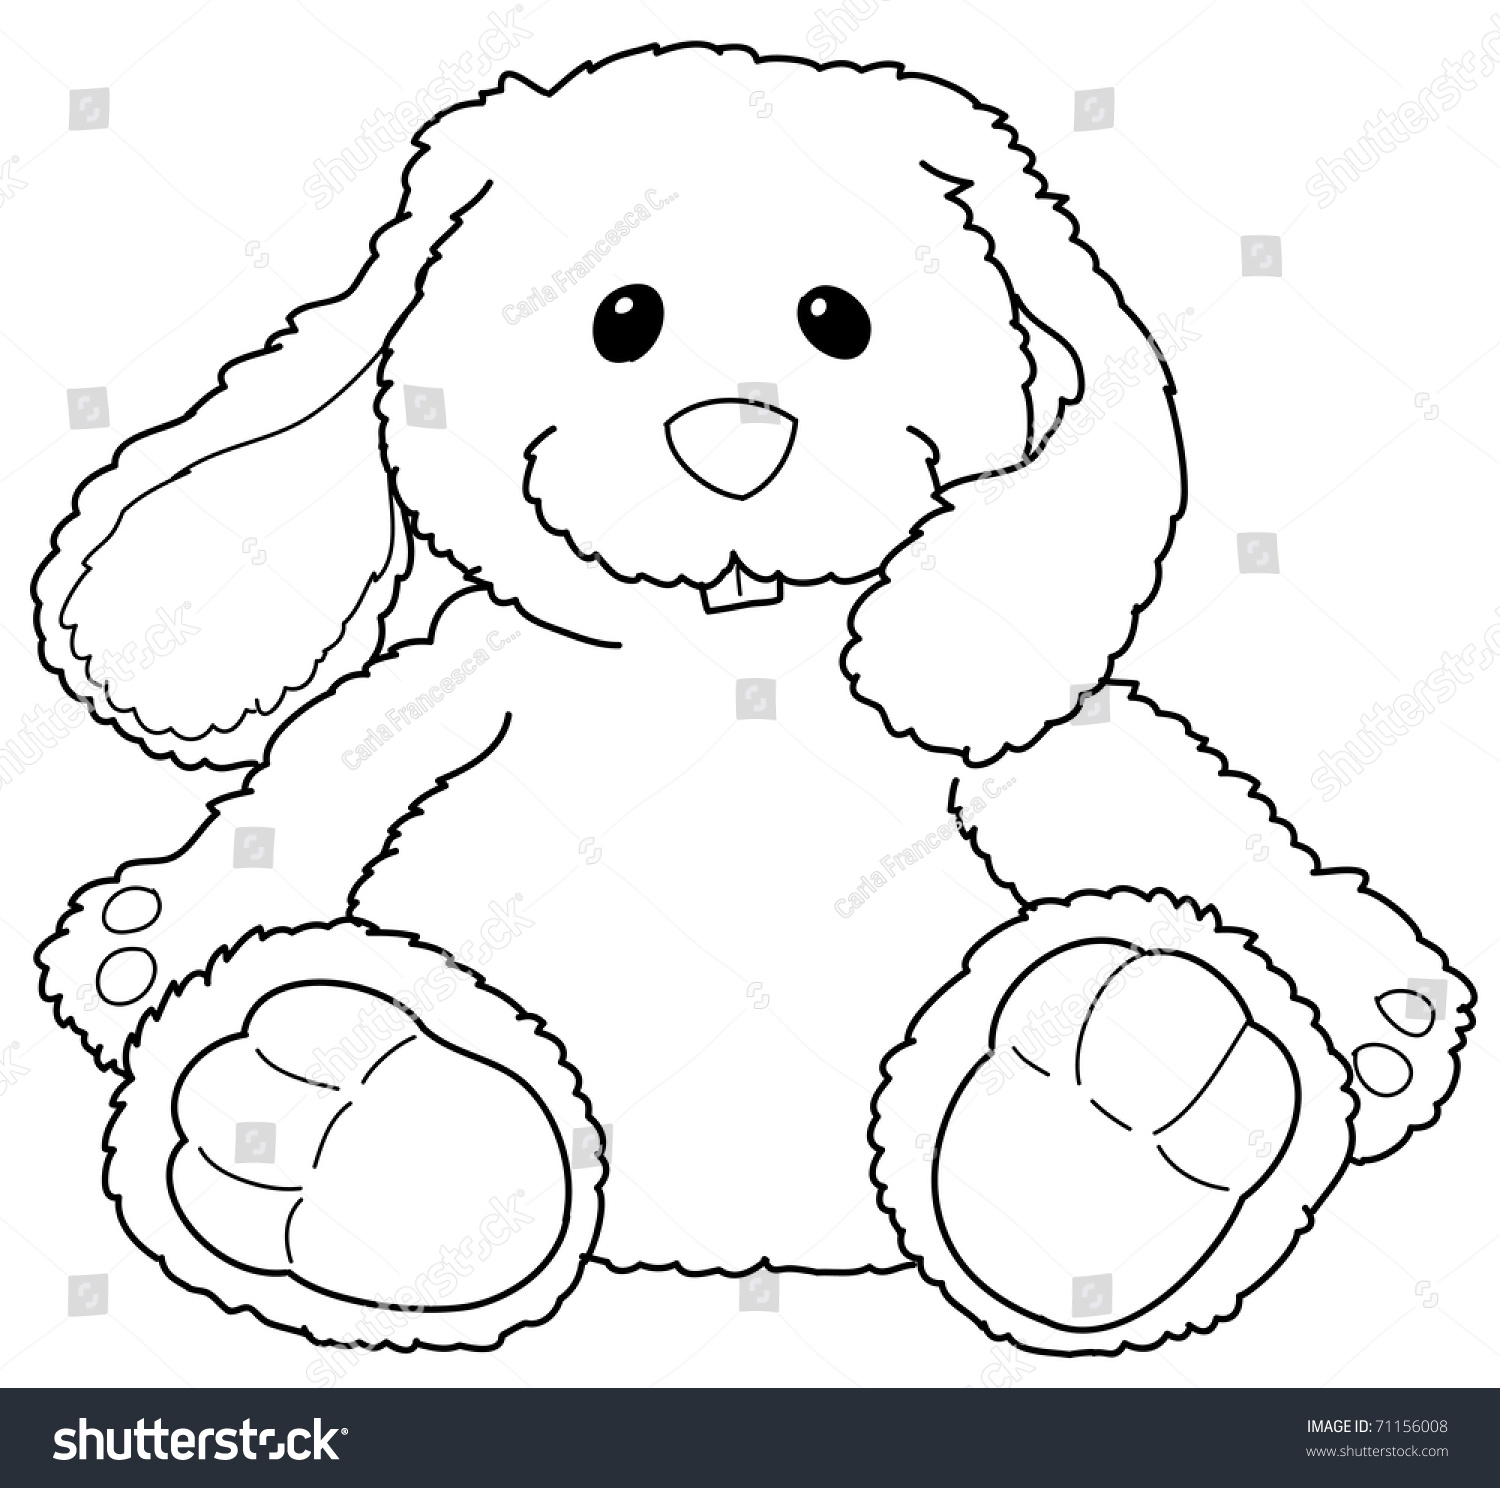 black and white stuffed bunny